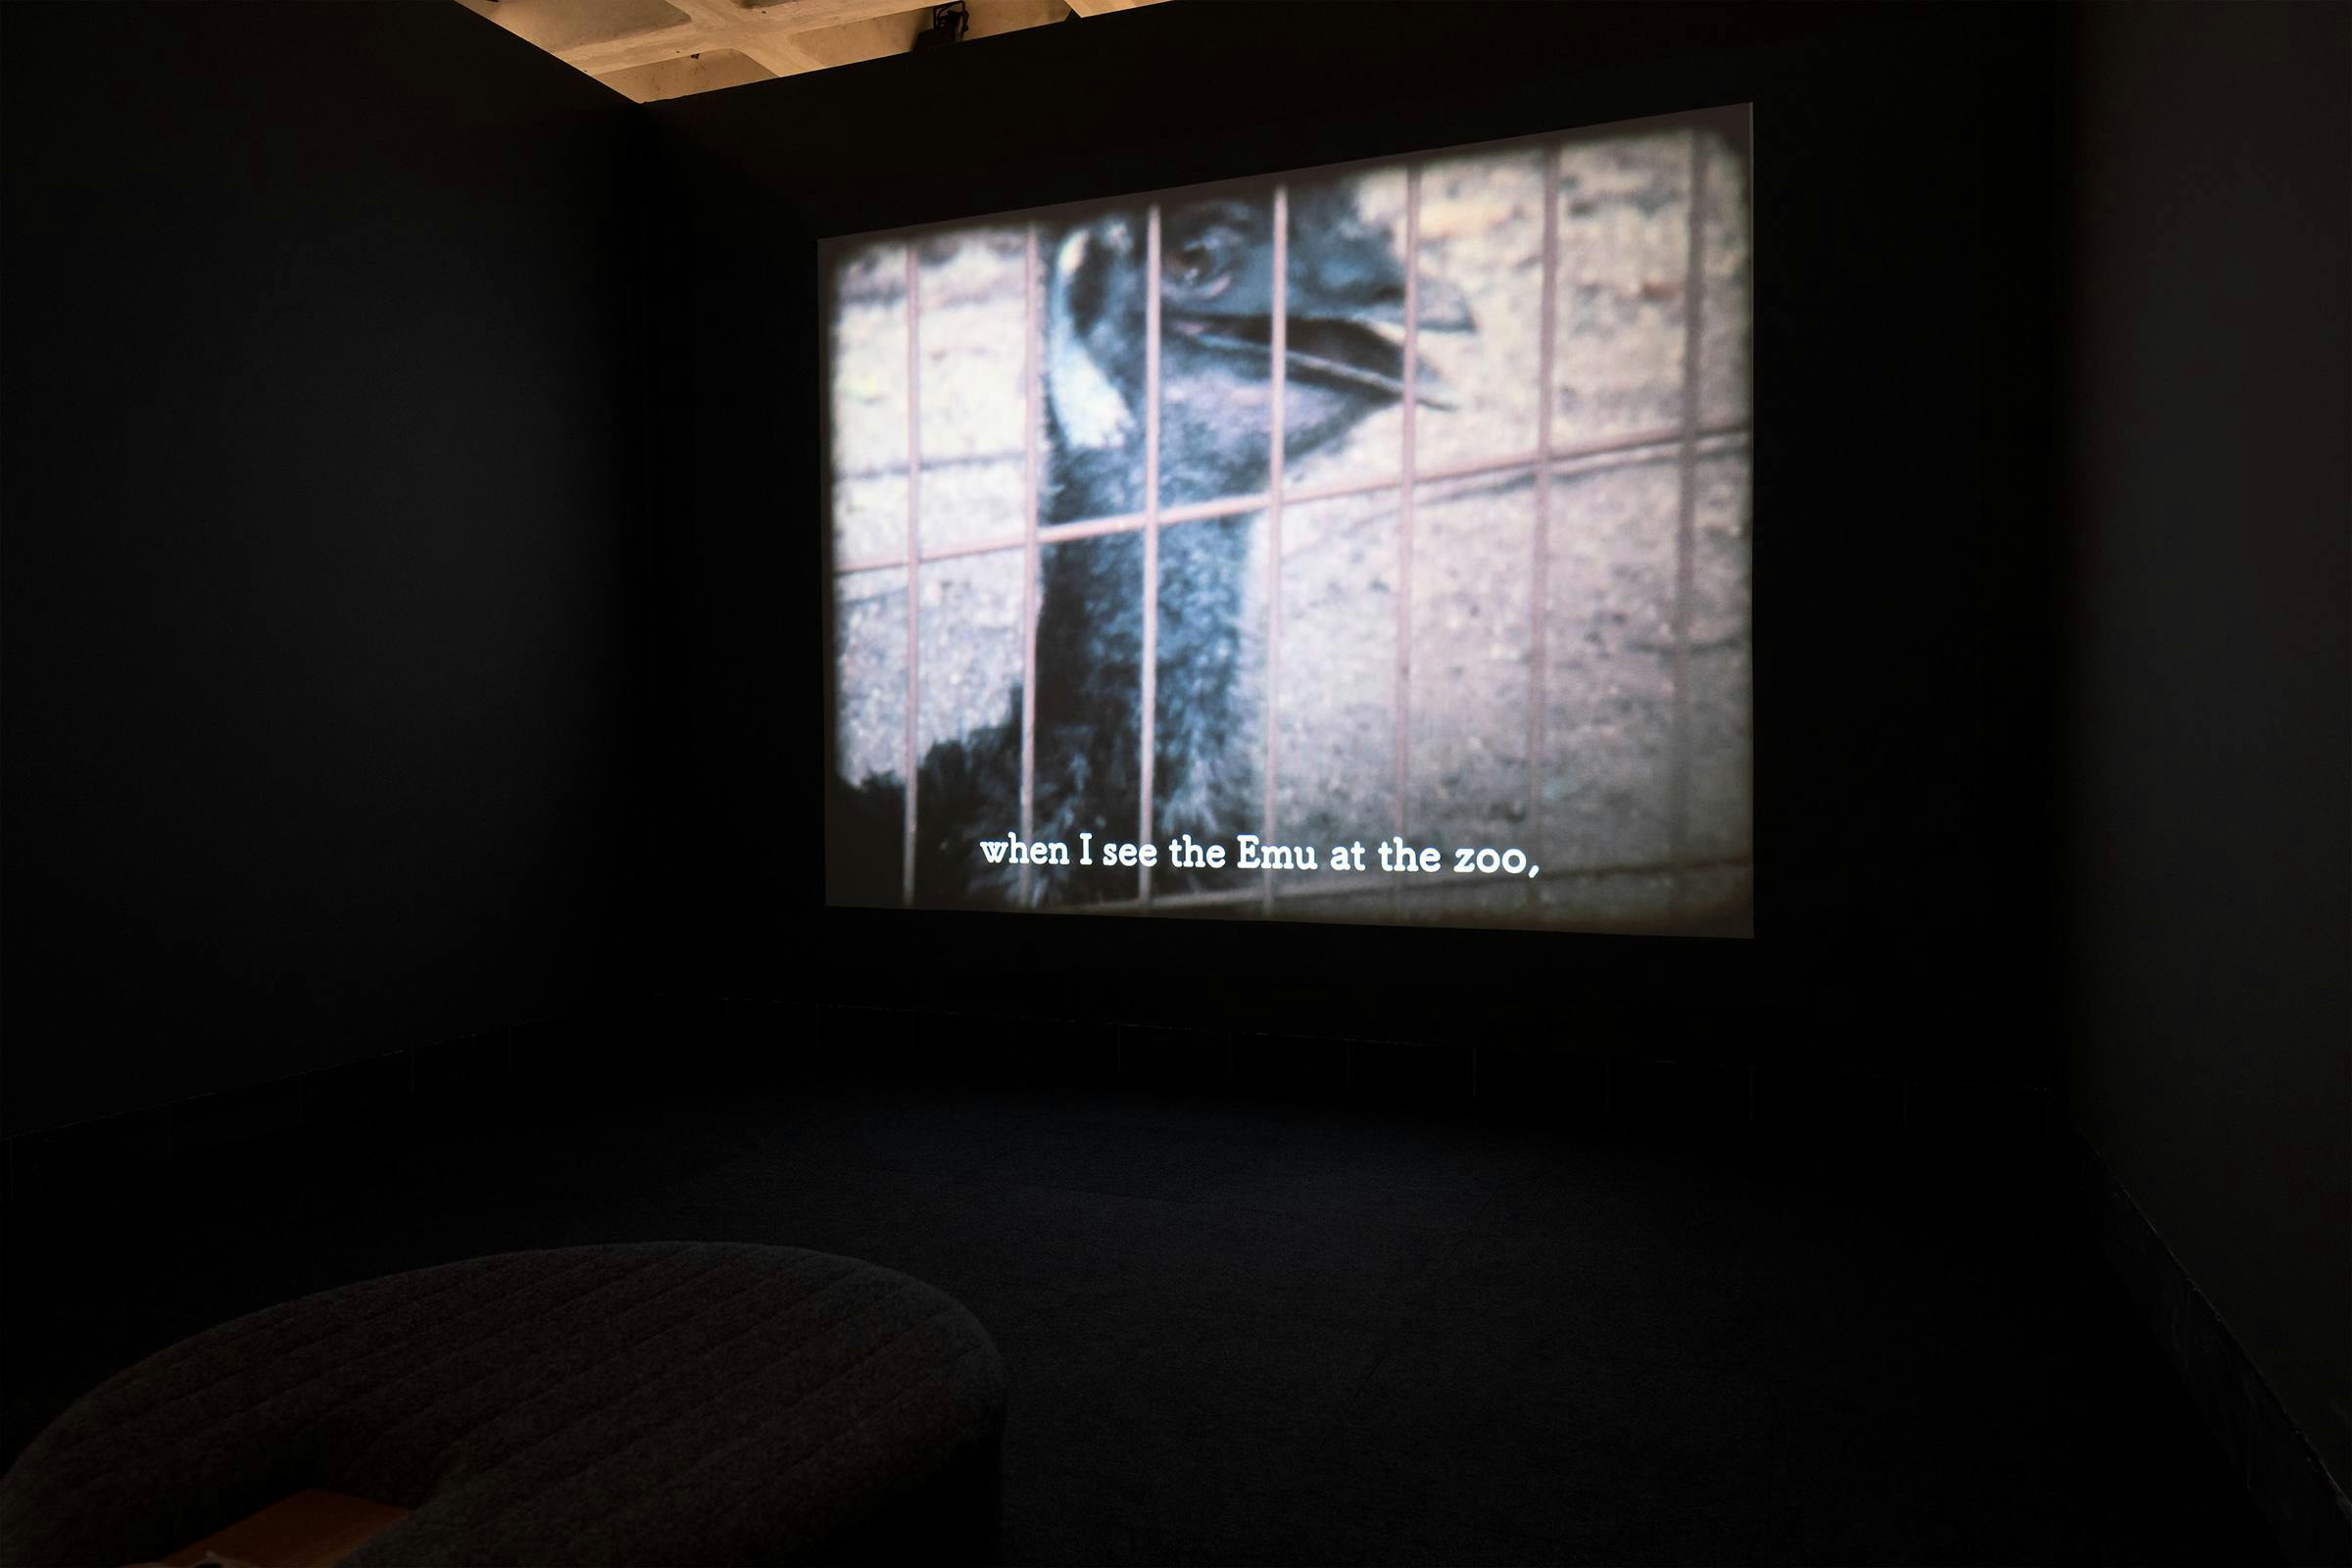 a video artwork projected in a gallery dark space. The projected image is of an emu behind a metal fence and a subtitle reads 'when I see the emu at the zoo,'